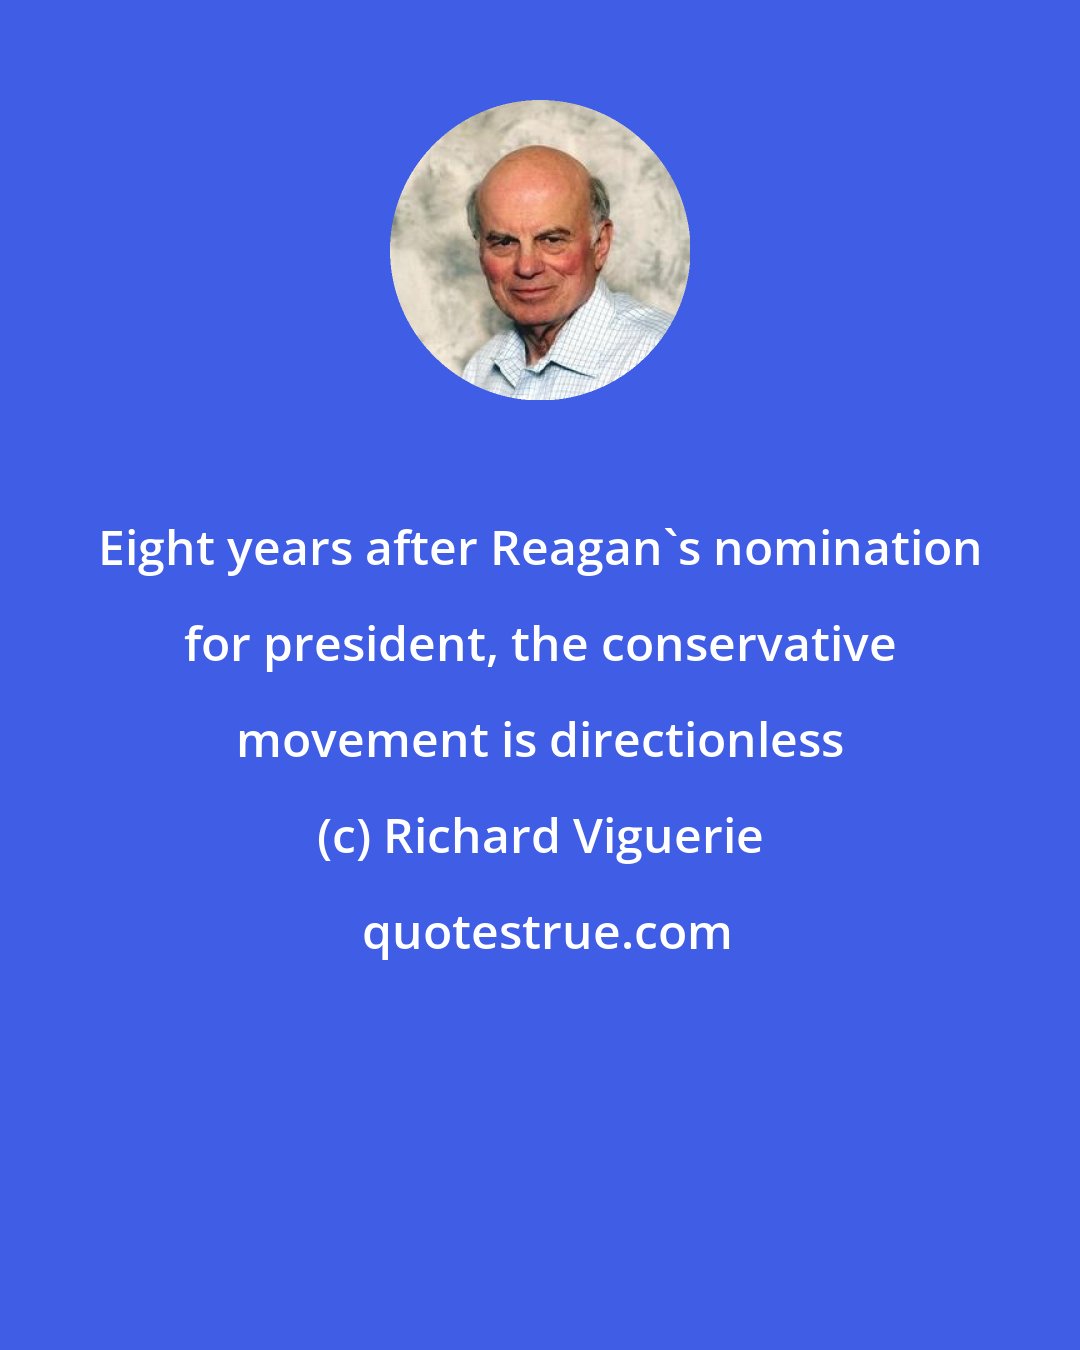 Richard Viguerie: Eight years after Reagan's nomination for president, the conservative movement is directionless